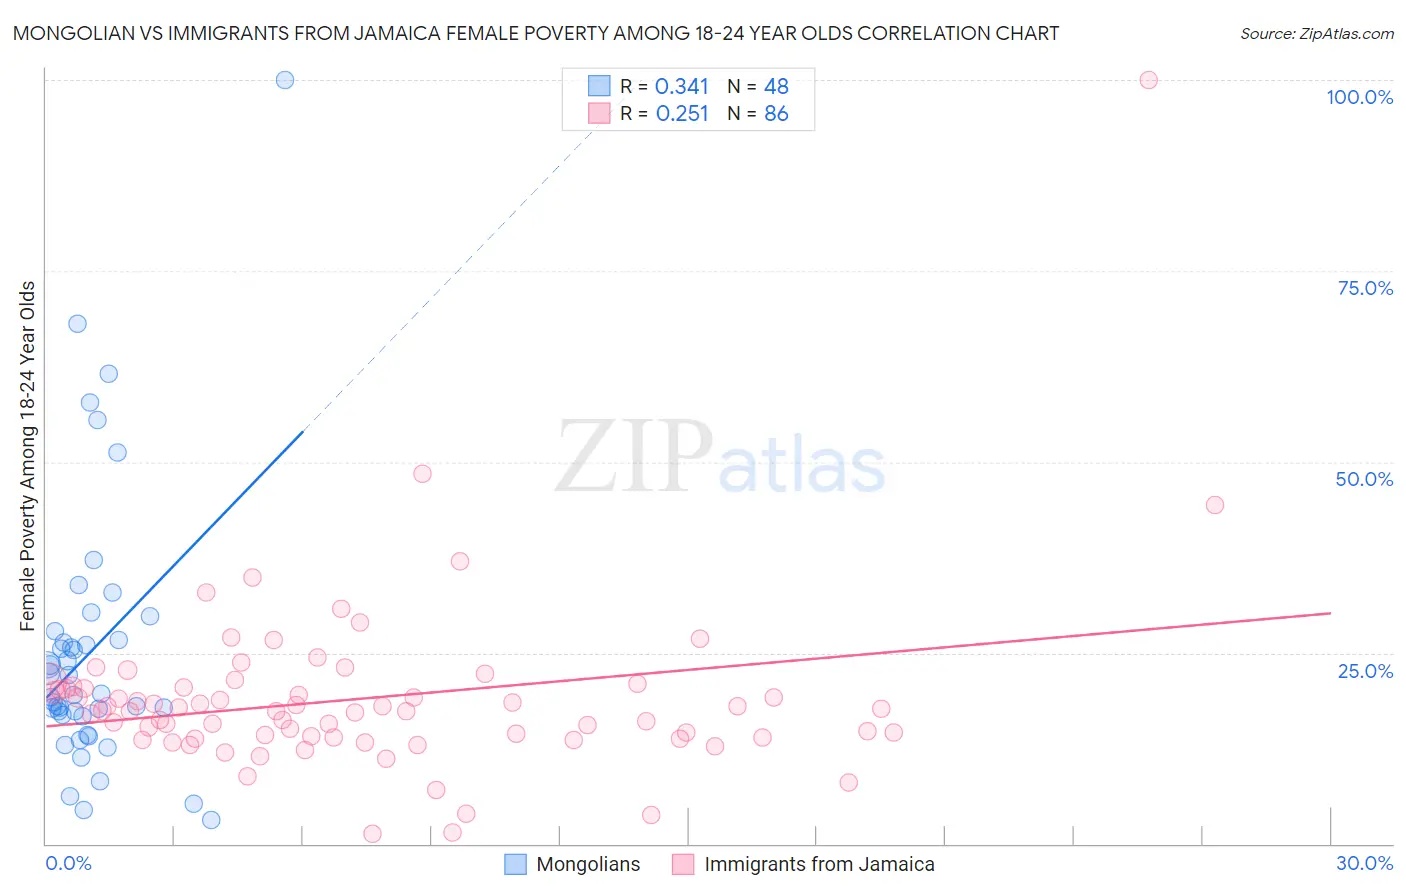 Mongolian vs Immigrants from Jamaica Female Poverty Among 18-24 Year Olds